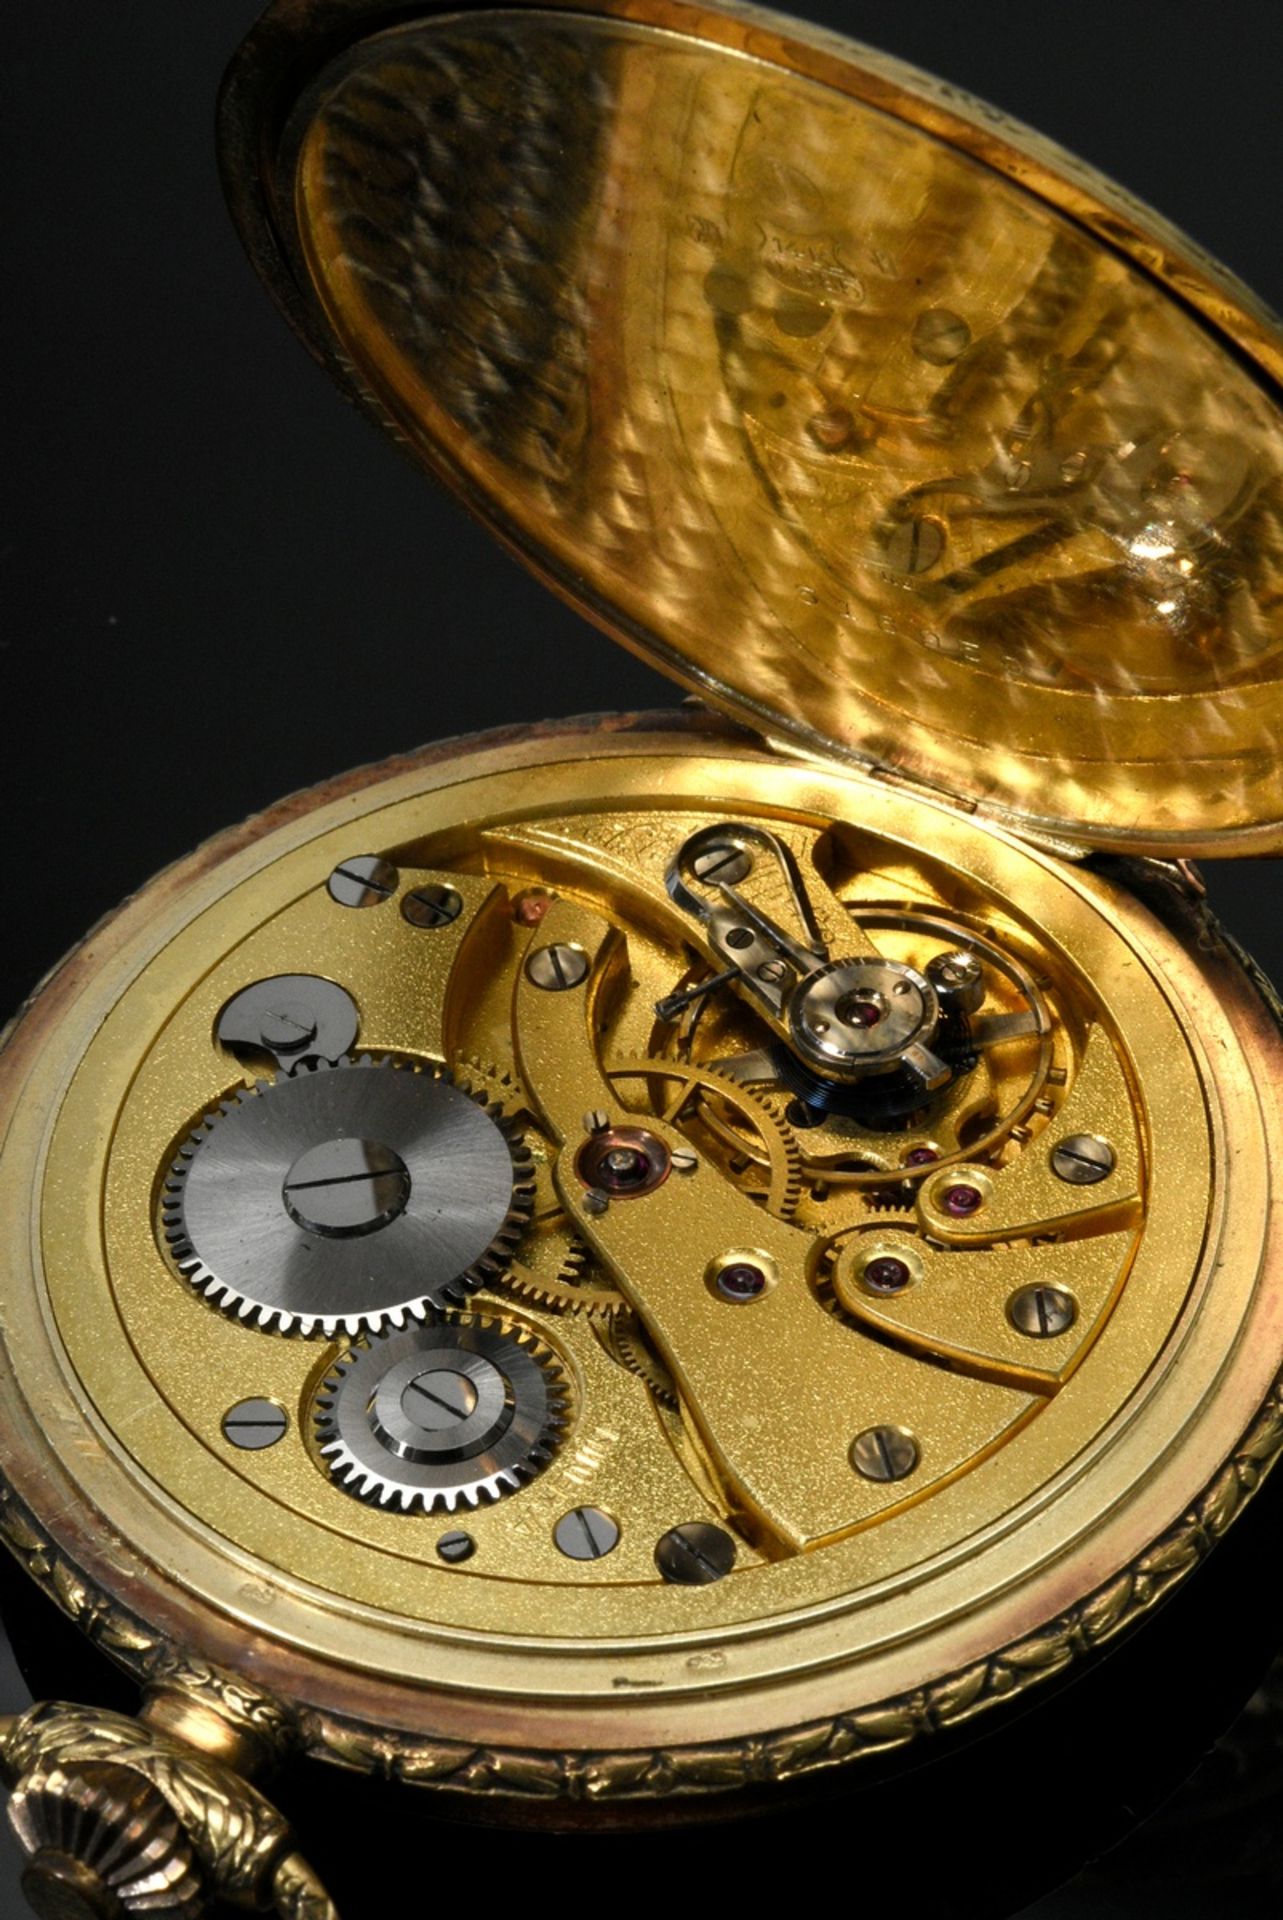 Three-cover yellow gold 585 Minerva pocket watch, lever movement, gilded dial, arabic numerals, sma - Image 8 of 9